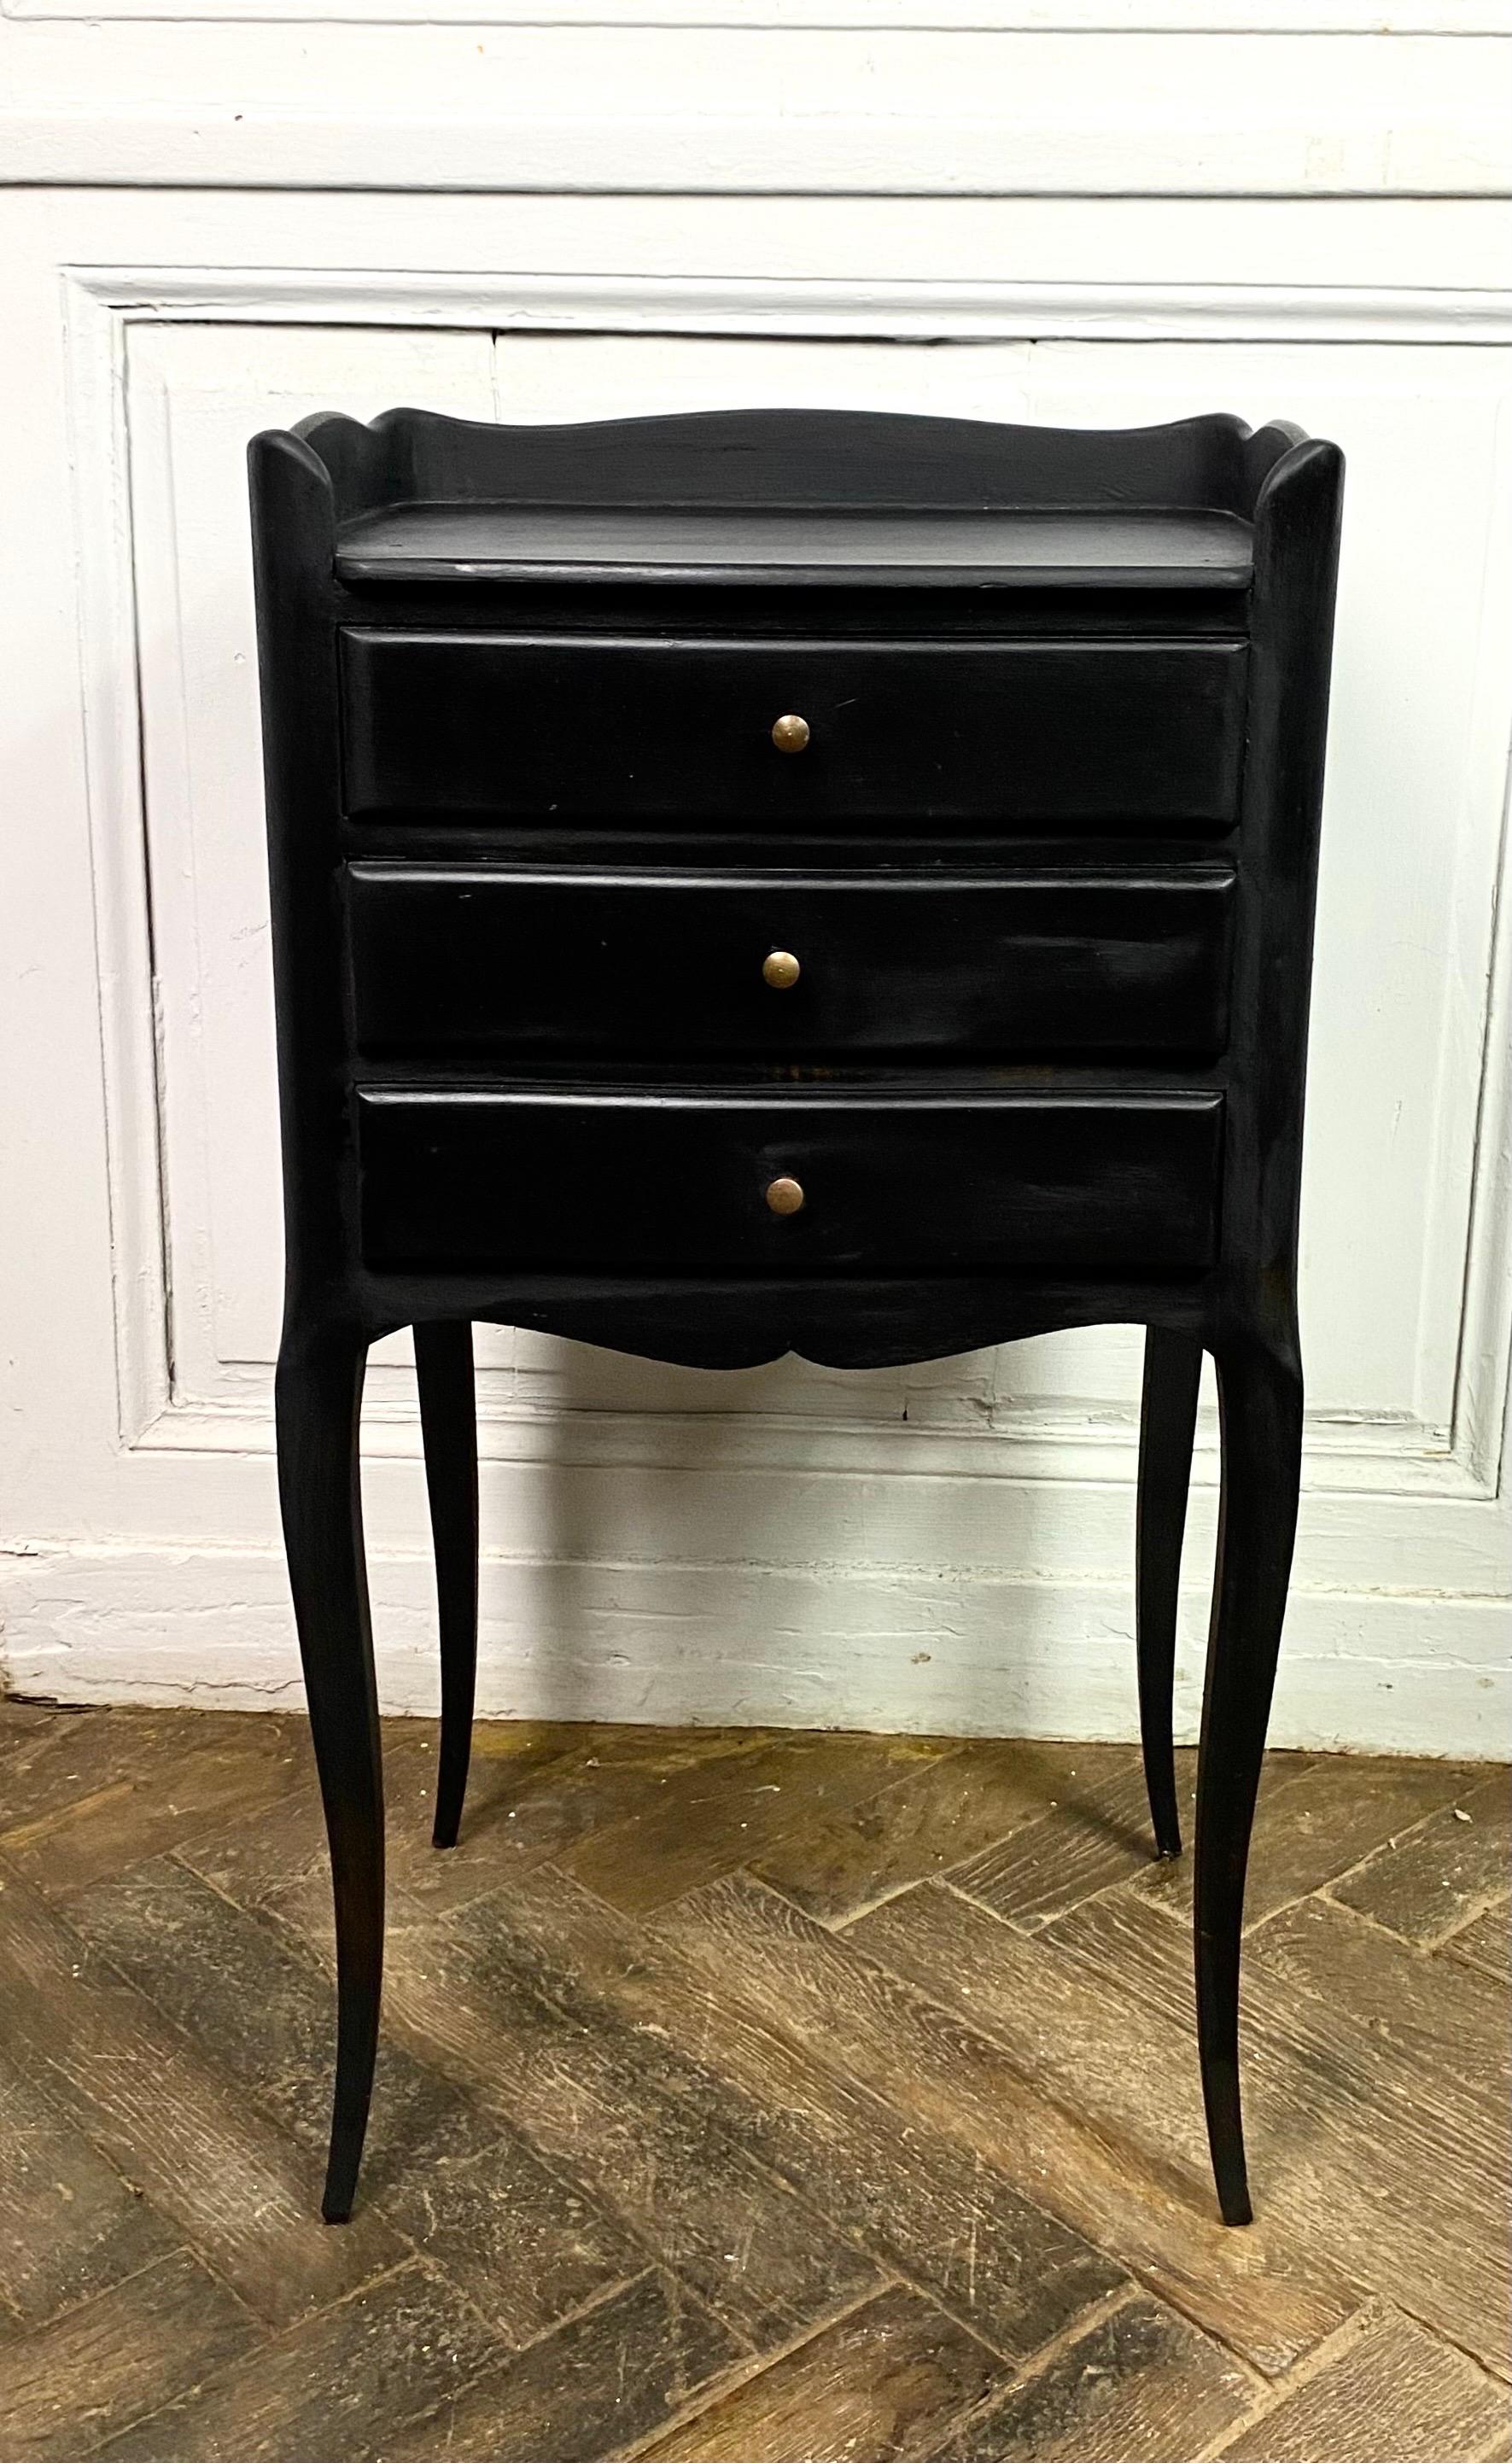 Very nice little black bedside table in the Louis
XV style.
The legs are slightly curved and the table is composed of three drawers.
France - 1950’s

The Louis XV style succeeds the Regency style. It is also called the Rocaille or Rococo style.
The